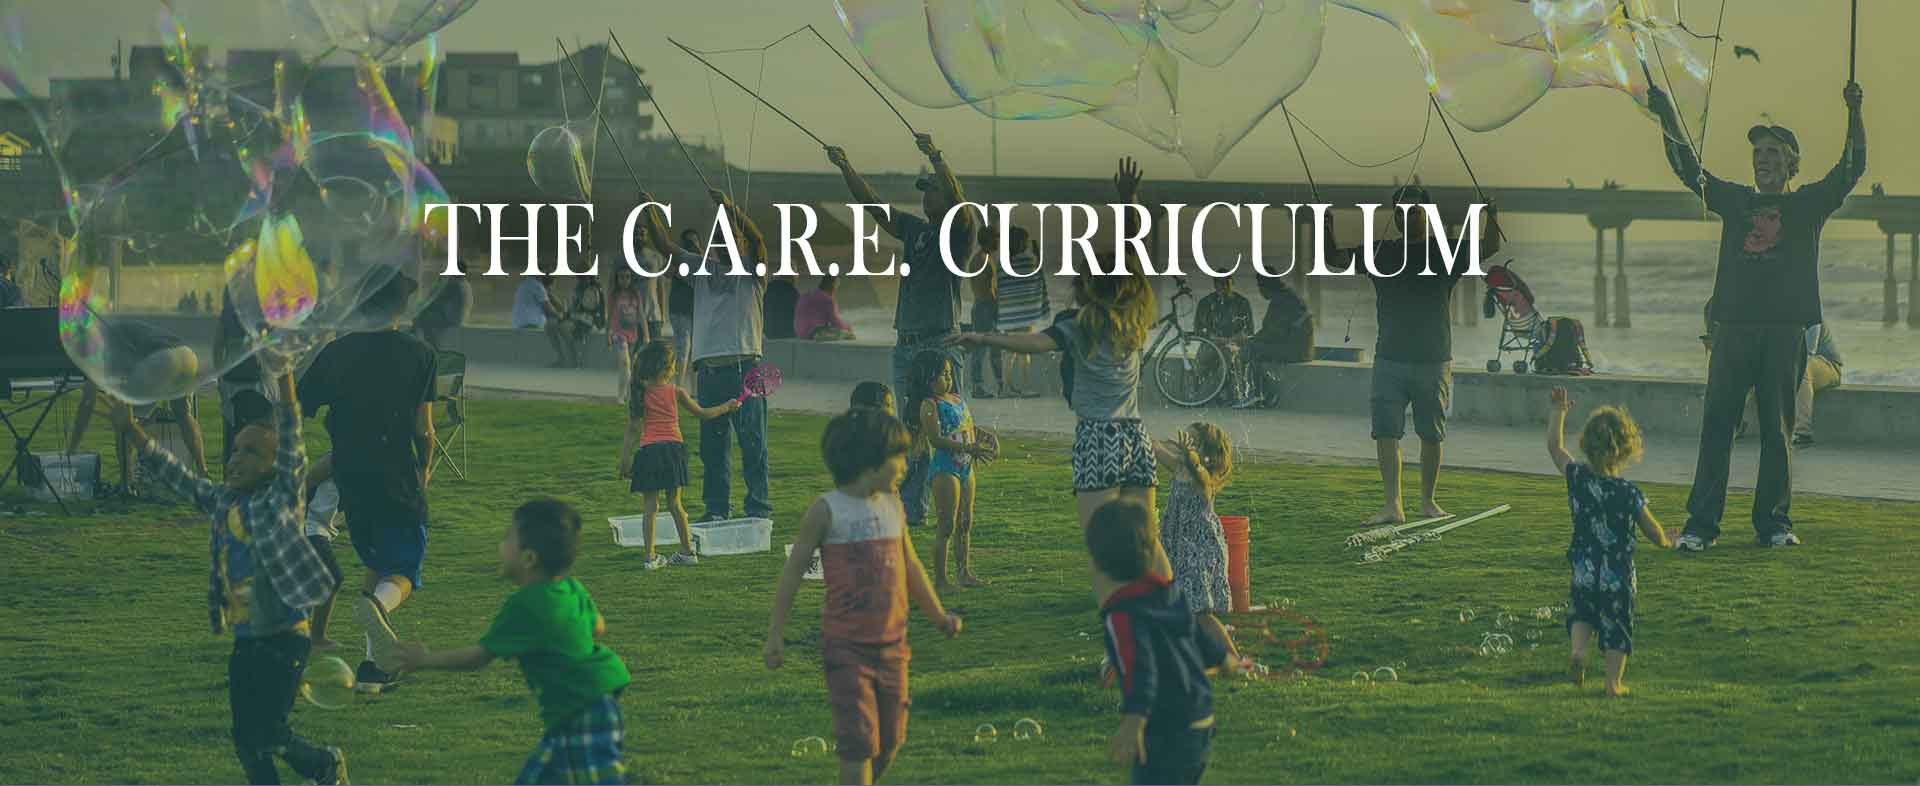 Heartstrings Publishing and the C.A.R.E. Curriculum